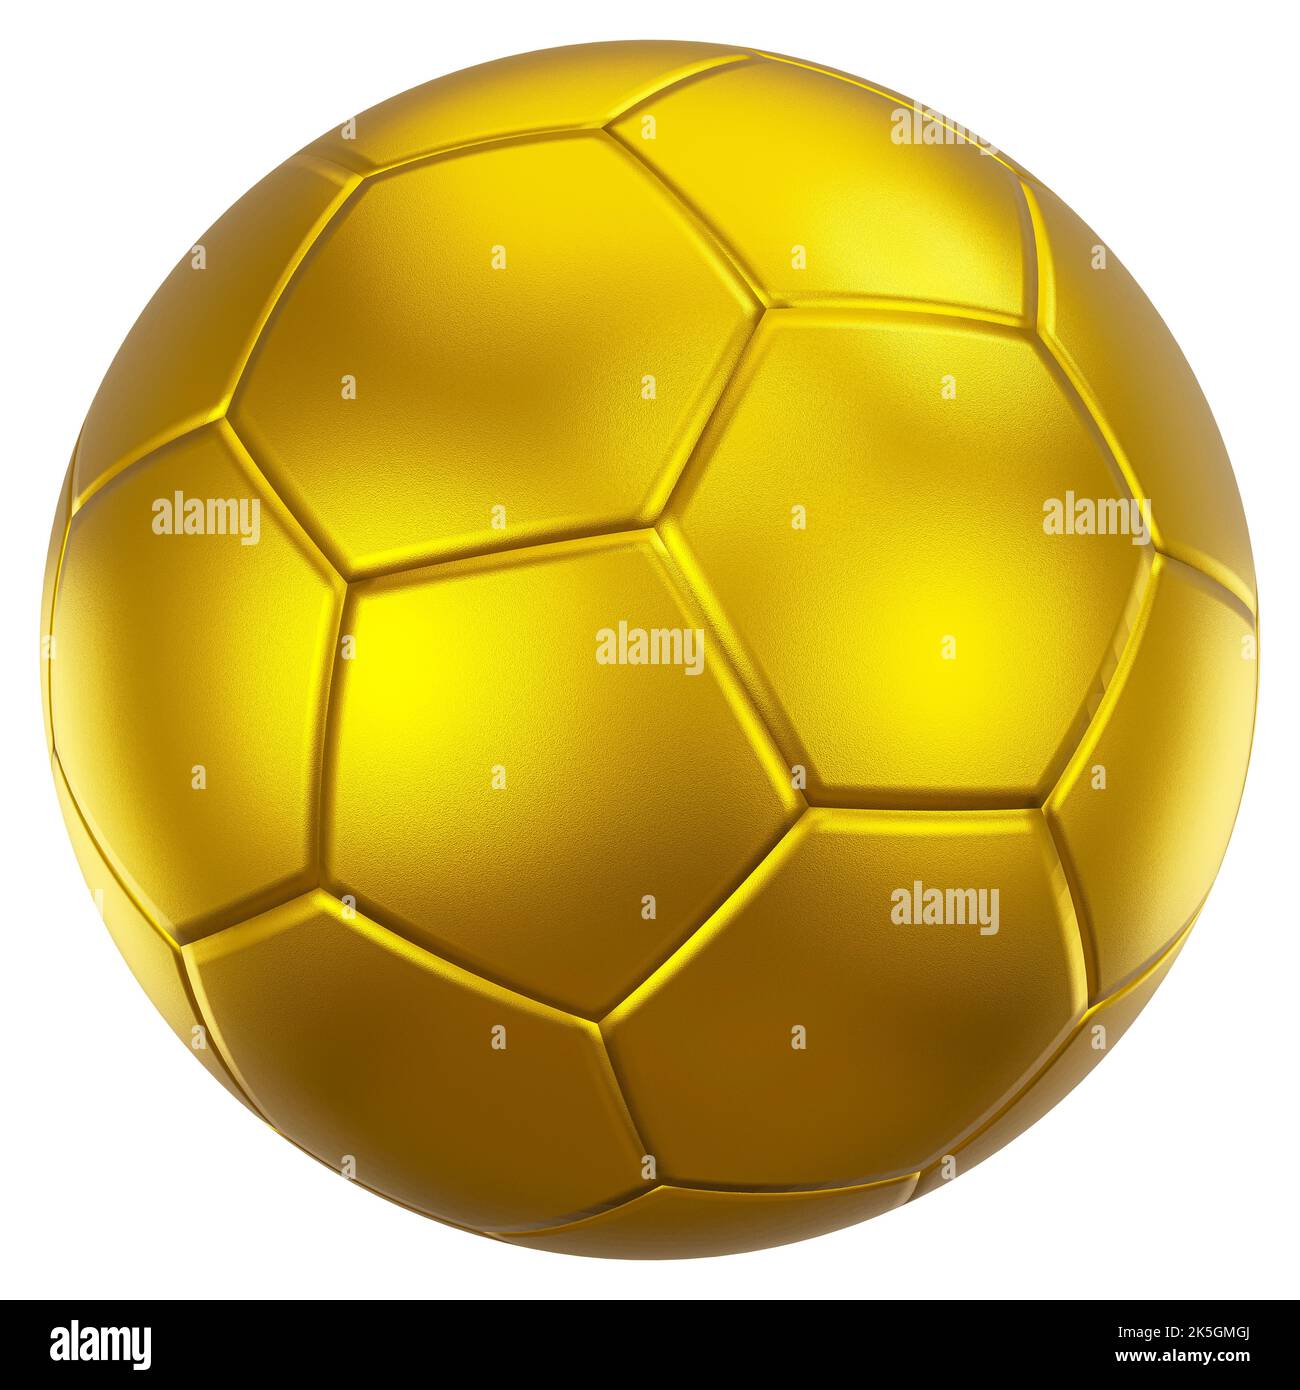 Golden soccer ball Cut Out Stock Images & Pictures - Alamy